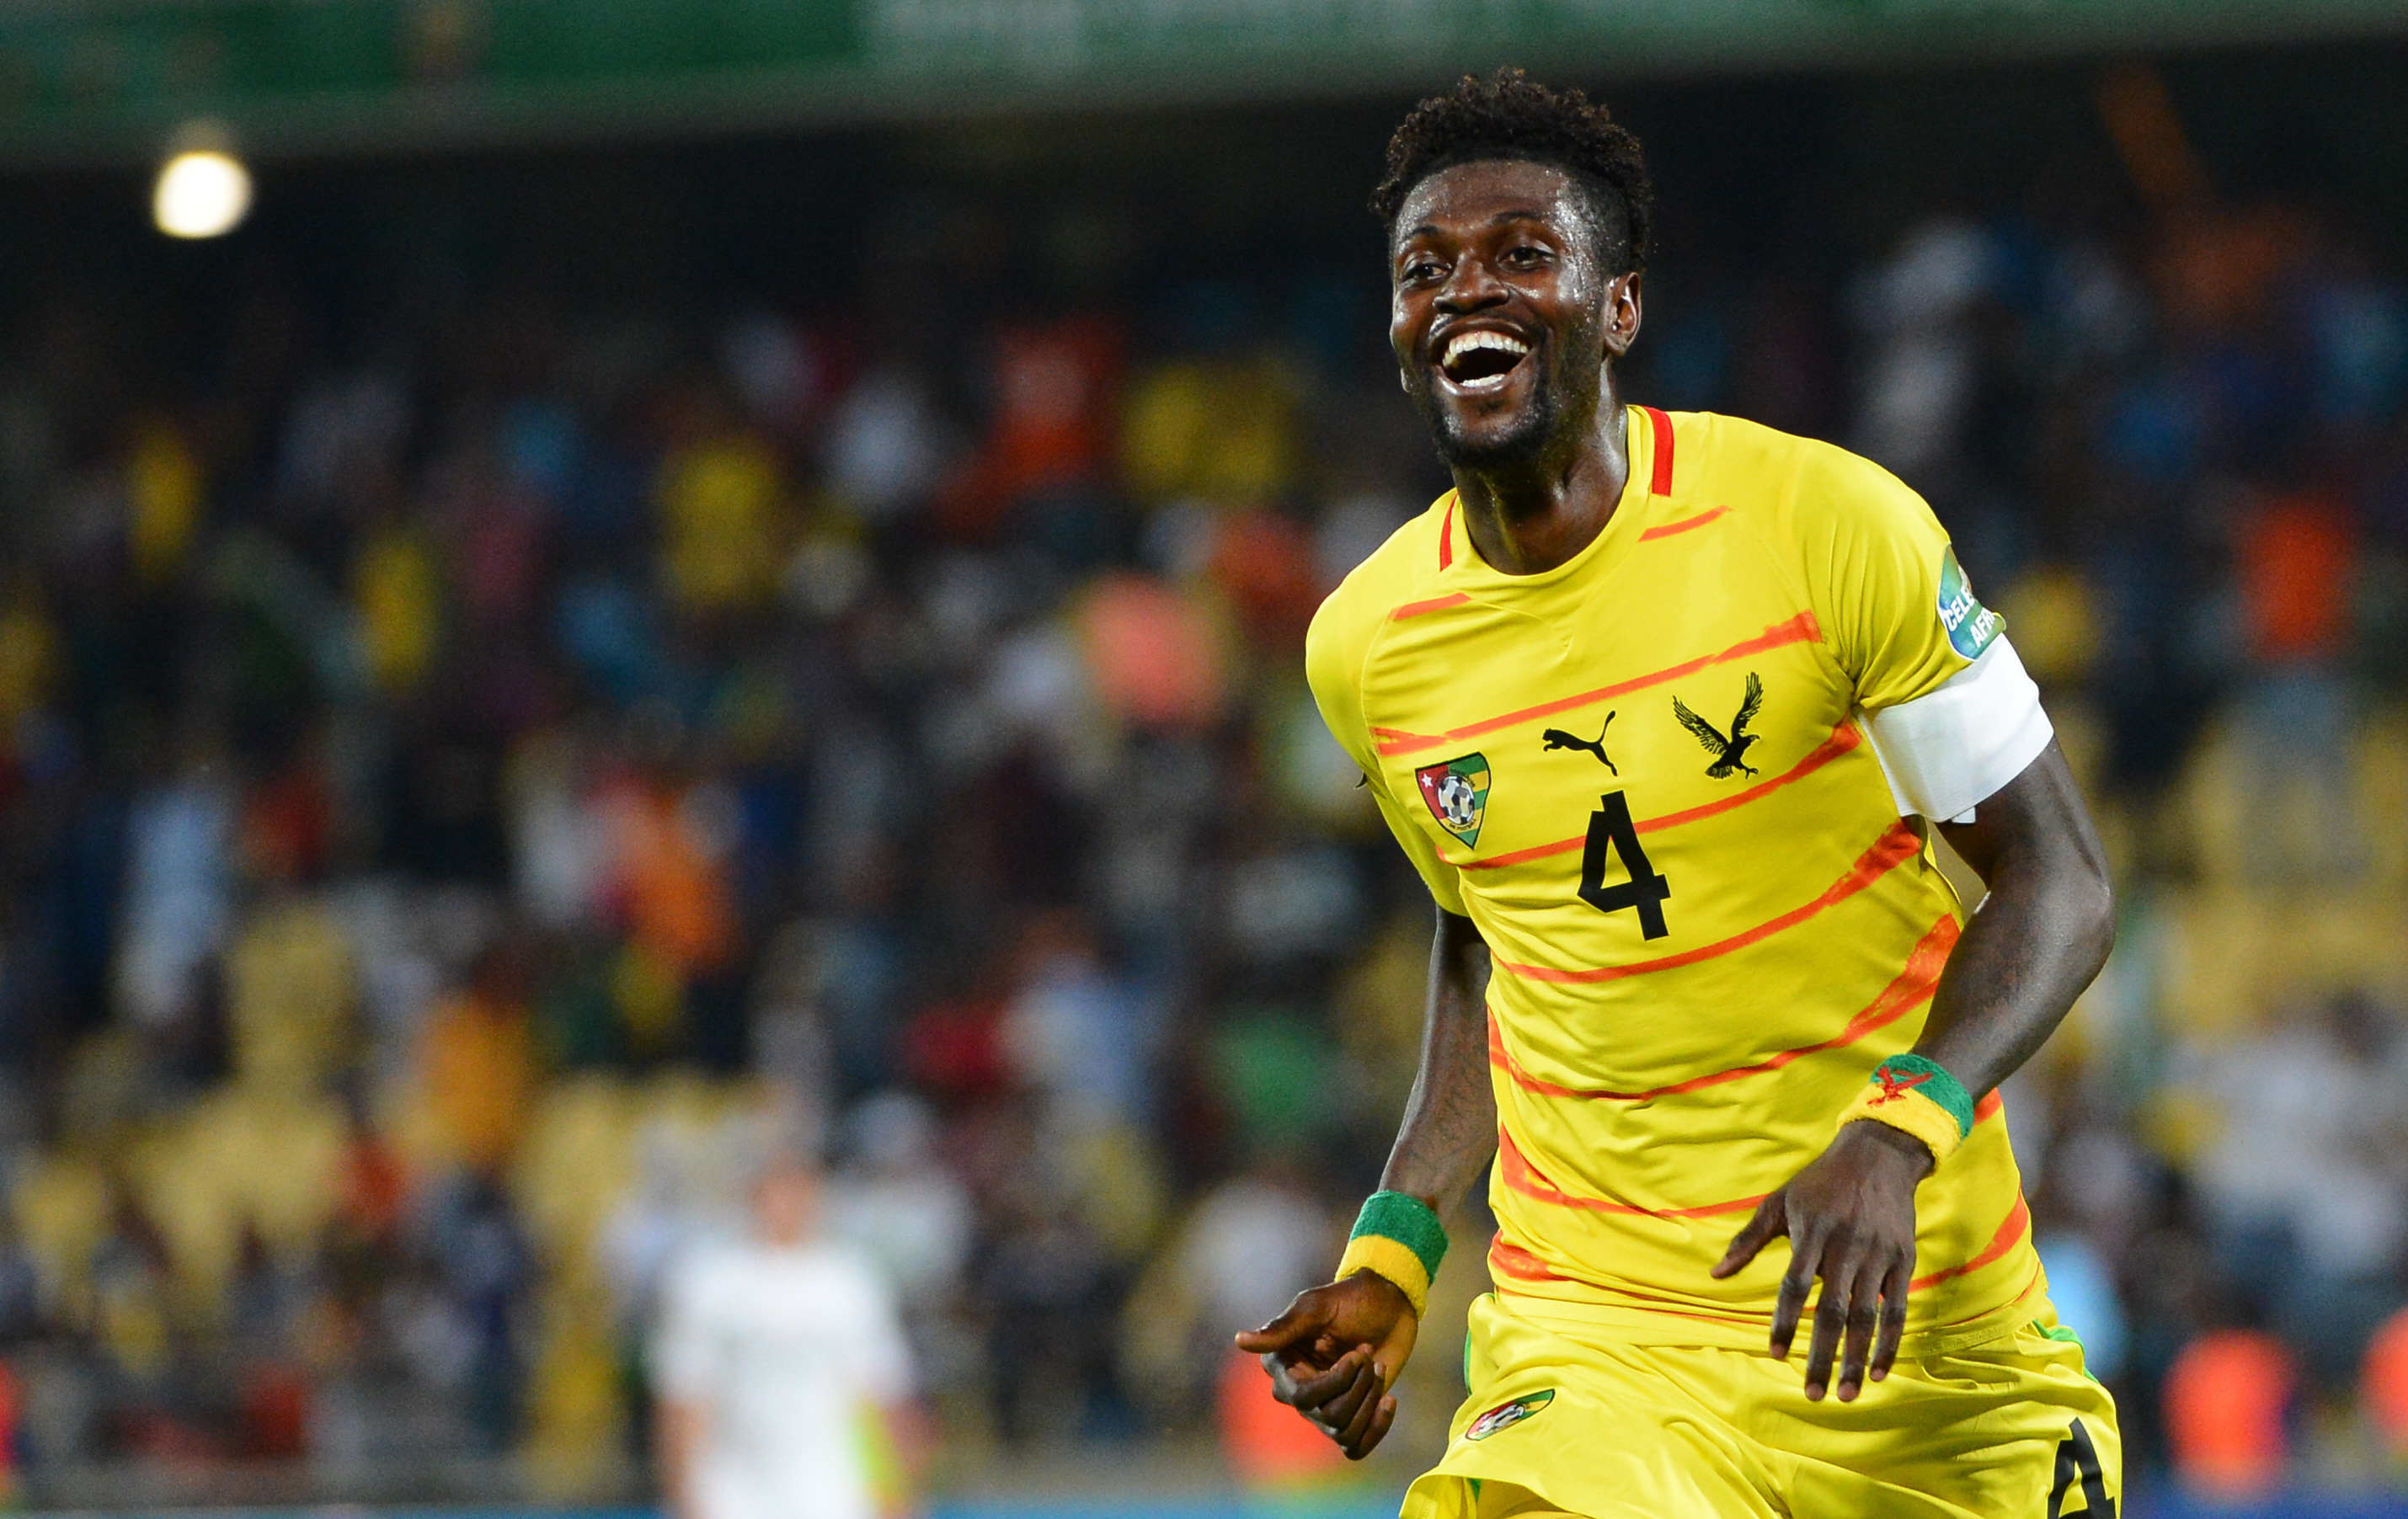 Emmanuel Adebayor in action for Togo against Algeria at the Africa Cup of Nations in January 2013.